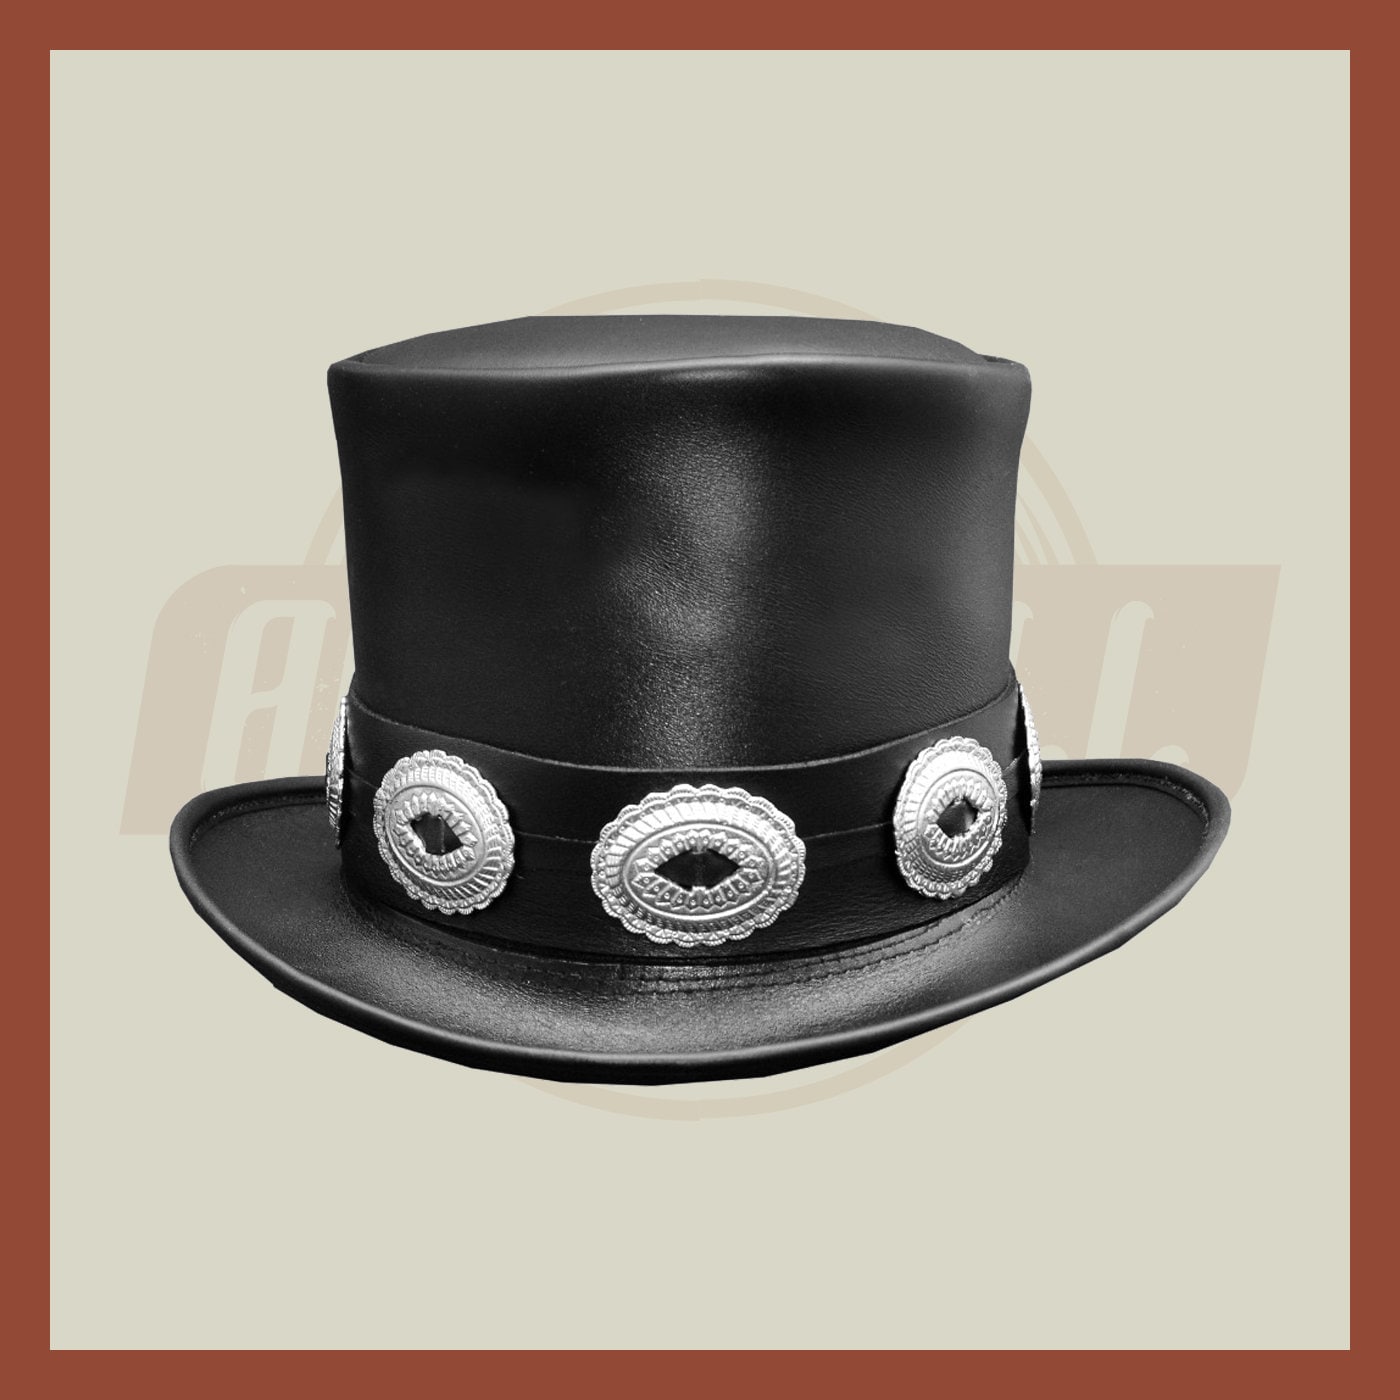 Top Hat Handmade with 100% Cowhide Leather Black & Purple Color Accessories Hats & Caps Formal Hats Top Hats Skull Band Style New with Tags 